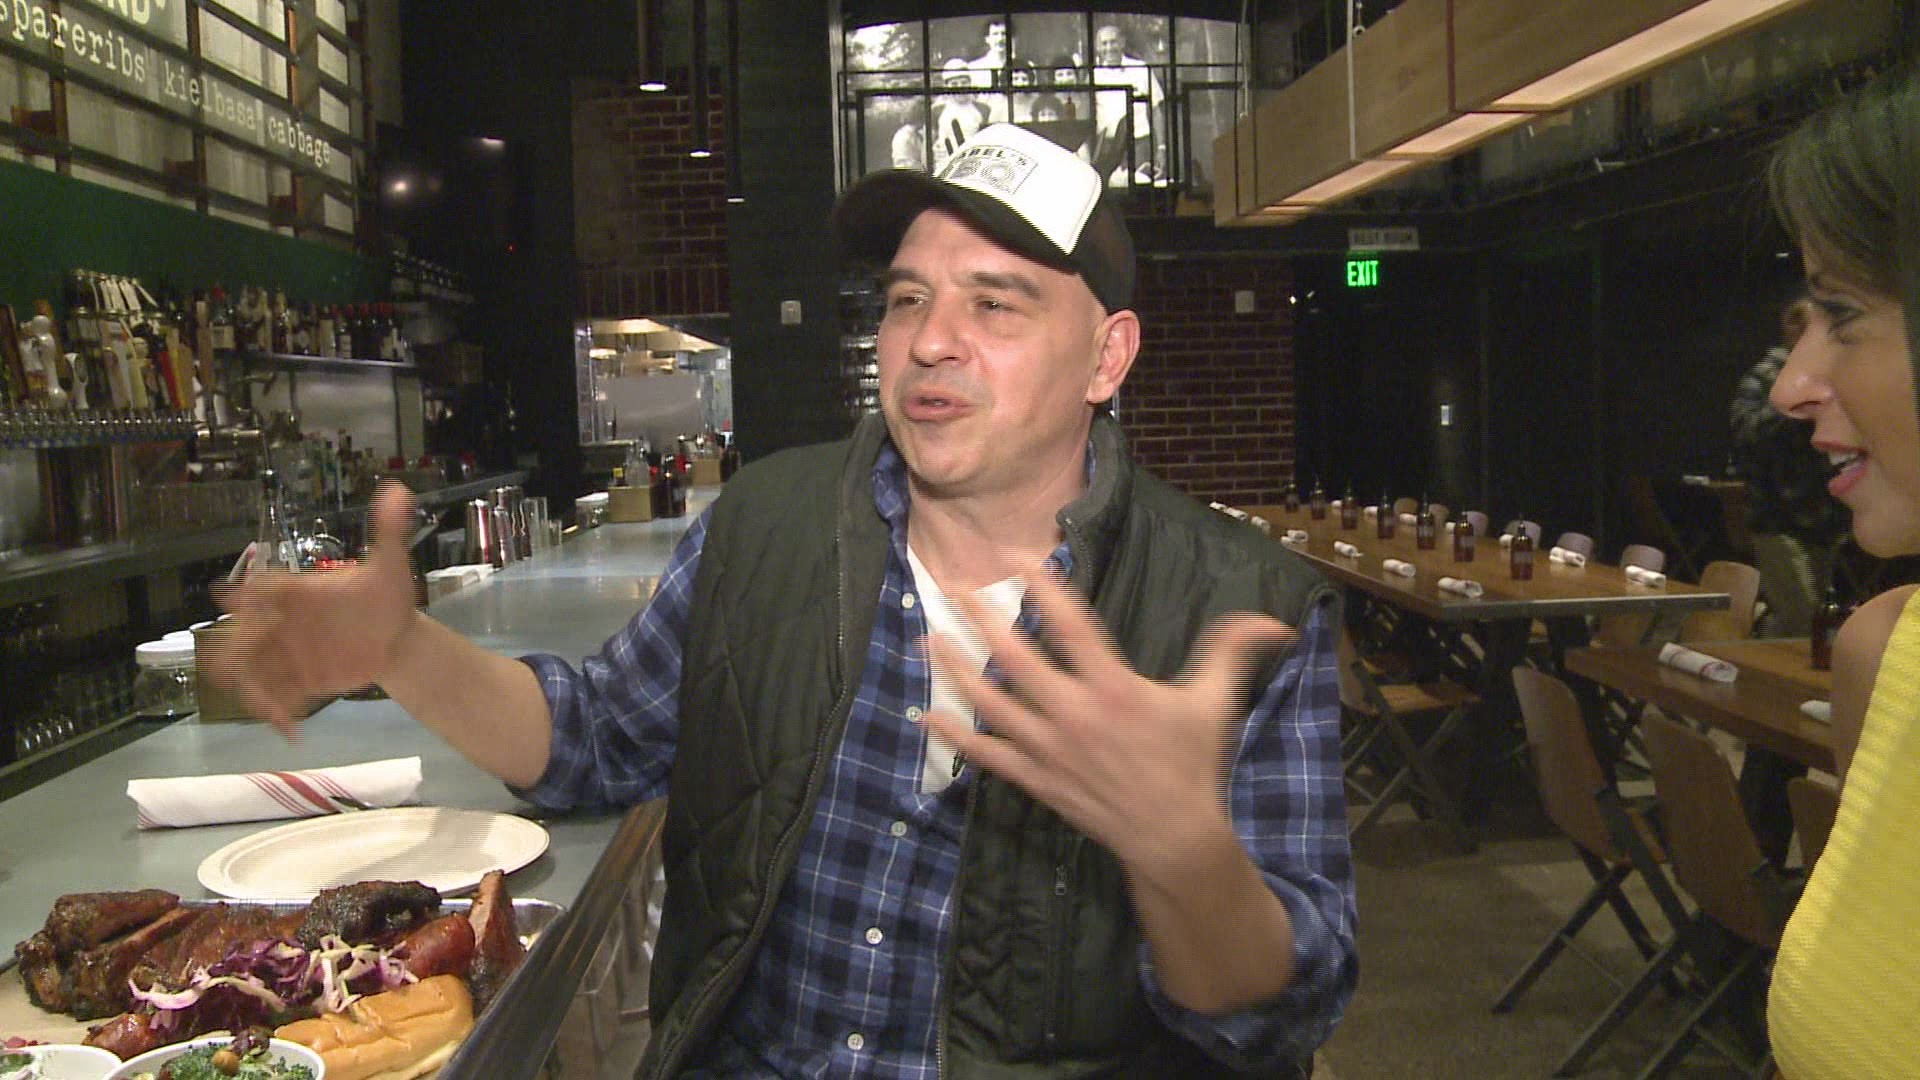 April 6, 2016: Famed chef Michael Symon sat down with WKYC's Hollie Giangreco for an in-depth look at his new Cleveland restaurant on E. 4th Street: Mabel's BBQ.